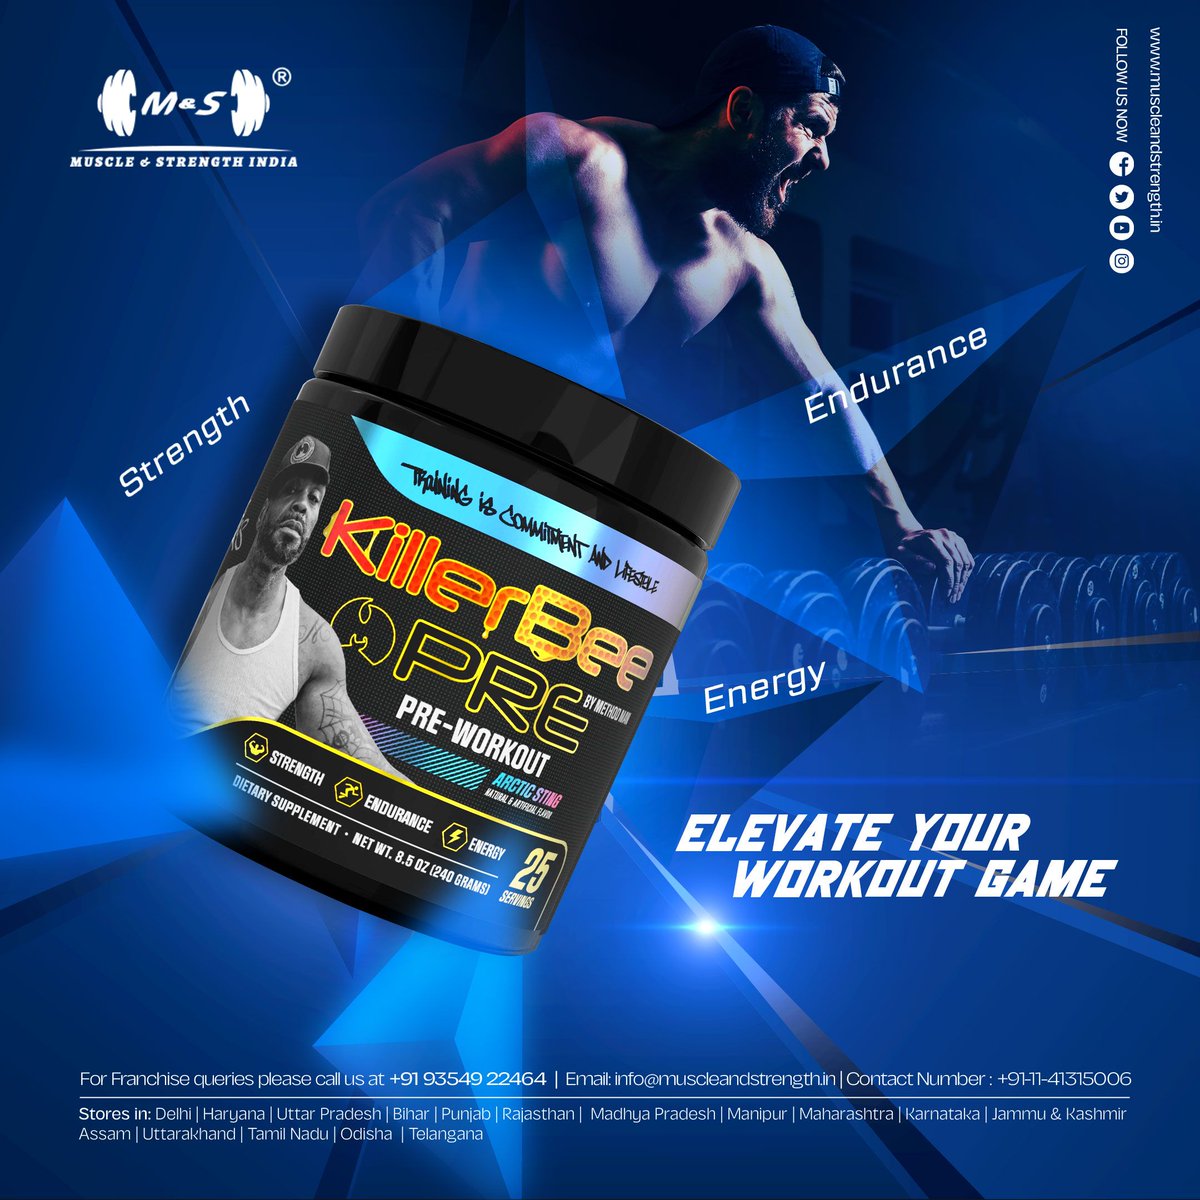 Elevate your workout game with Killer Bee Pre! 🐝💥 Next-level energy, endurance, and flavor for insane results. Are you ready for the commitment?  #muscleandstrengthindia #muscleandstrengthindiaofficial #KillerBeePre   #FitnessSupplemen #gain #fitness #bodybuilding #nutrition